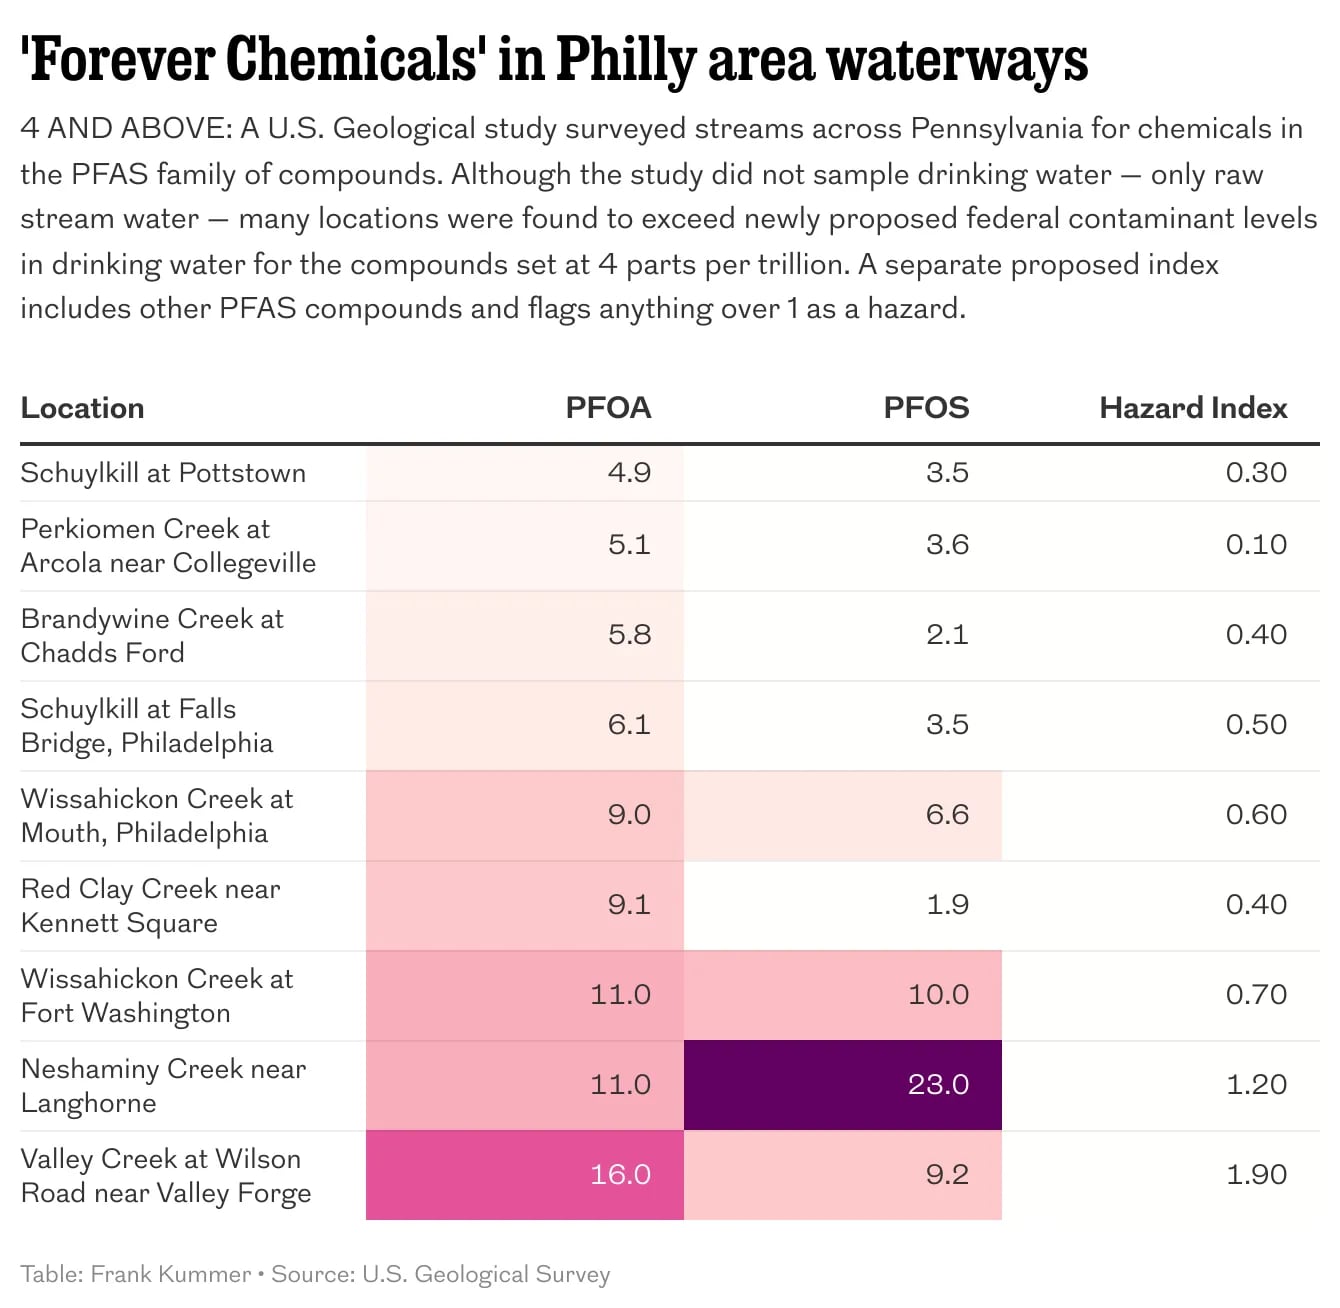 The forever chemicals in Pennsylvania's steams, and SuperAgers